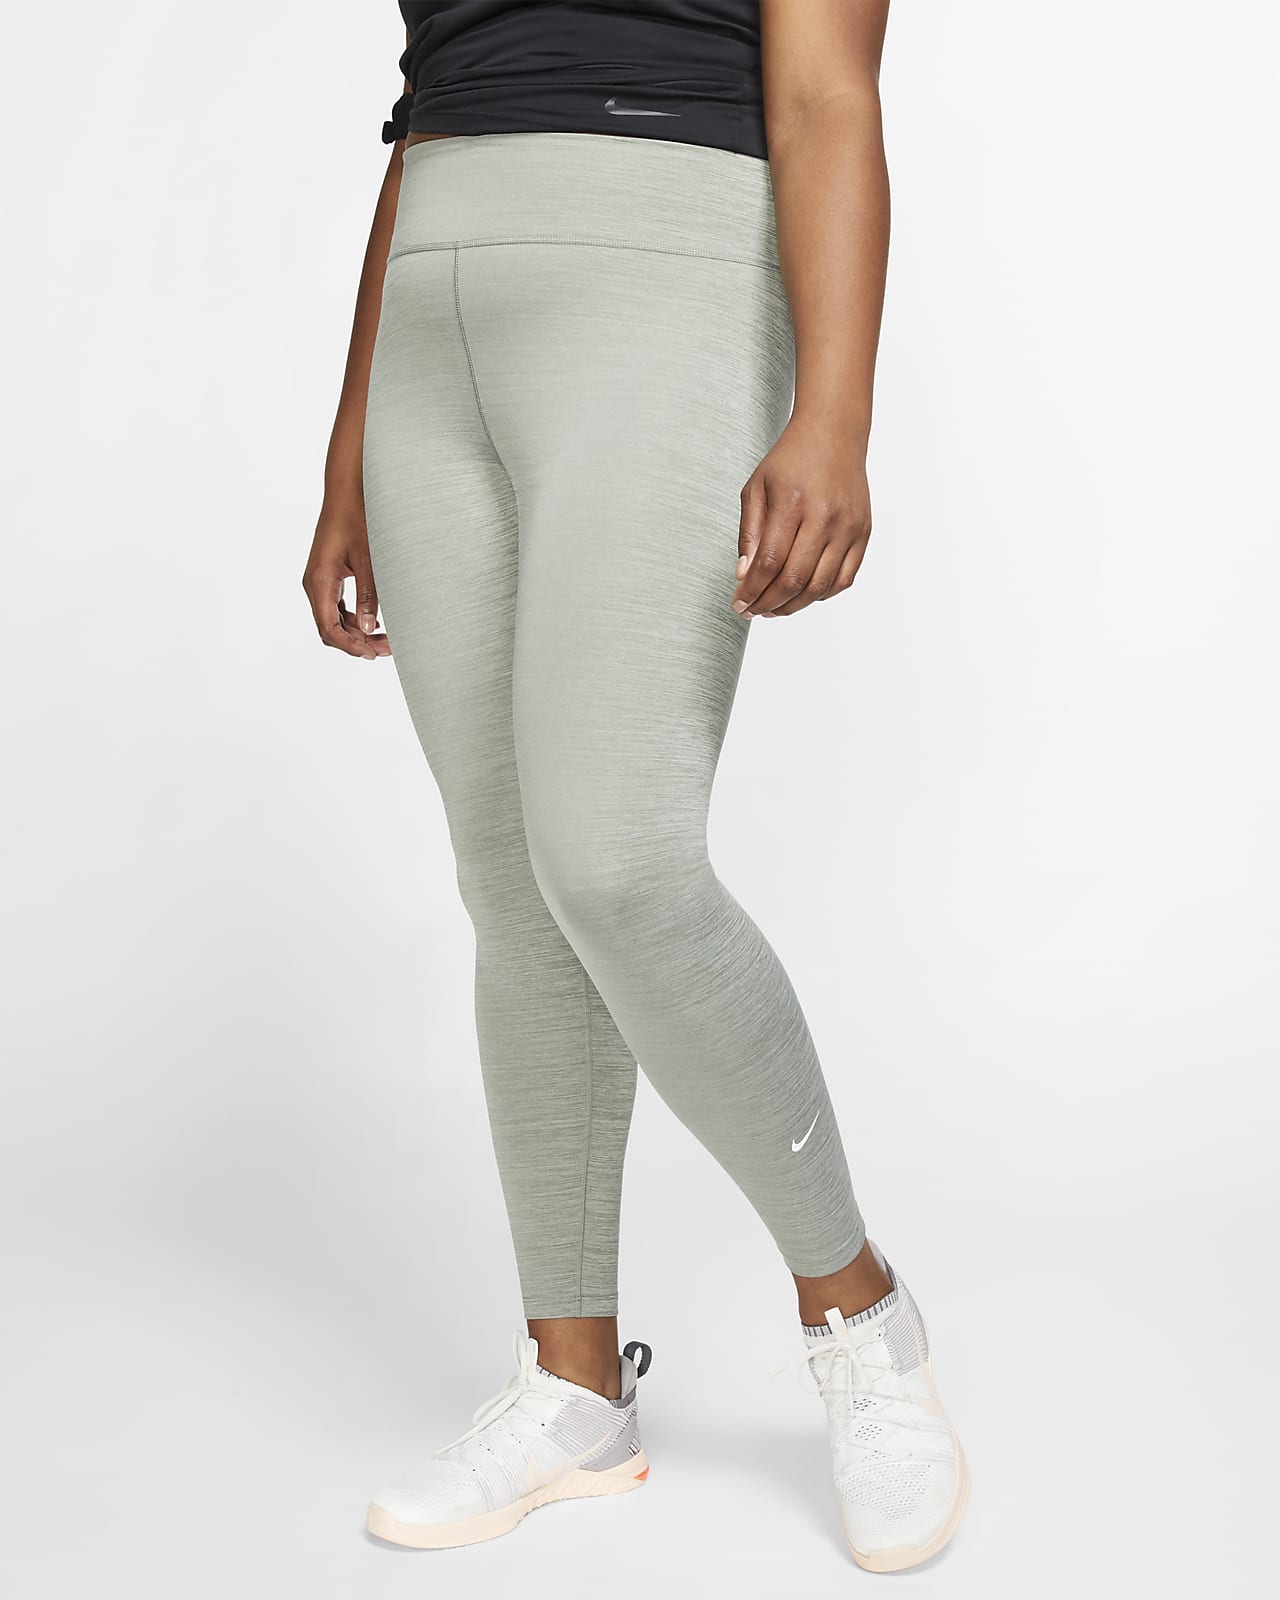 Nike One Women's Tights (Plus Size 